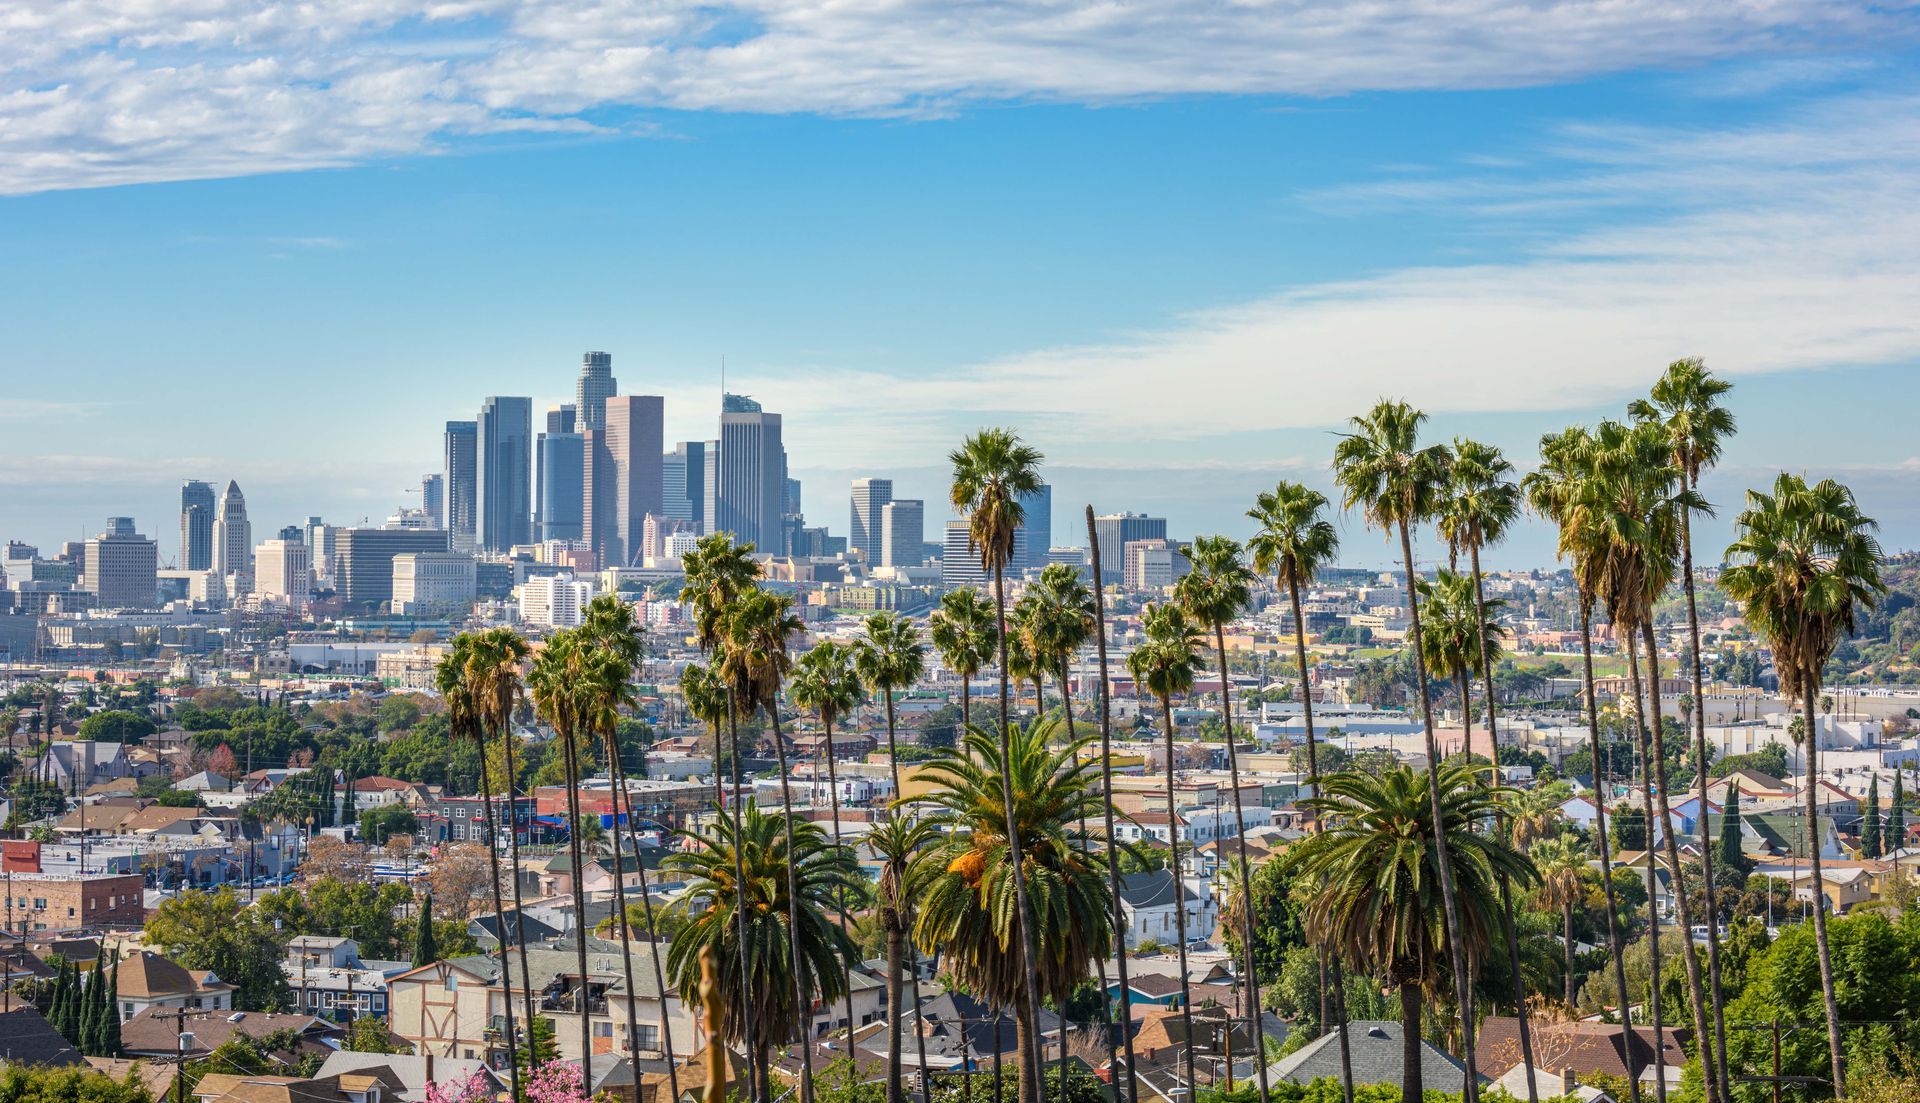 Los Angeles City skyline daytime with palm trees